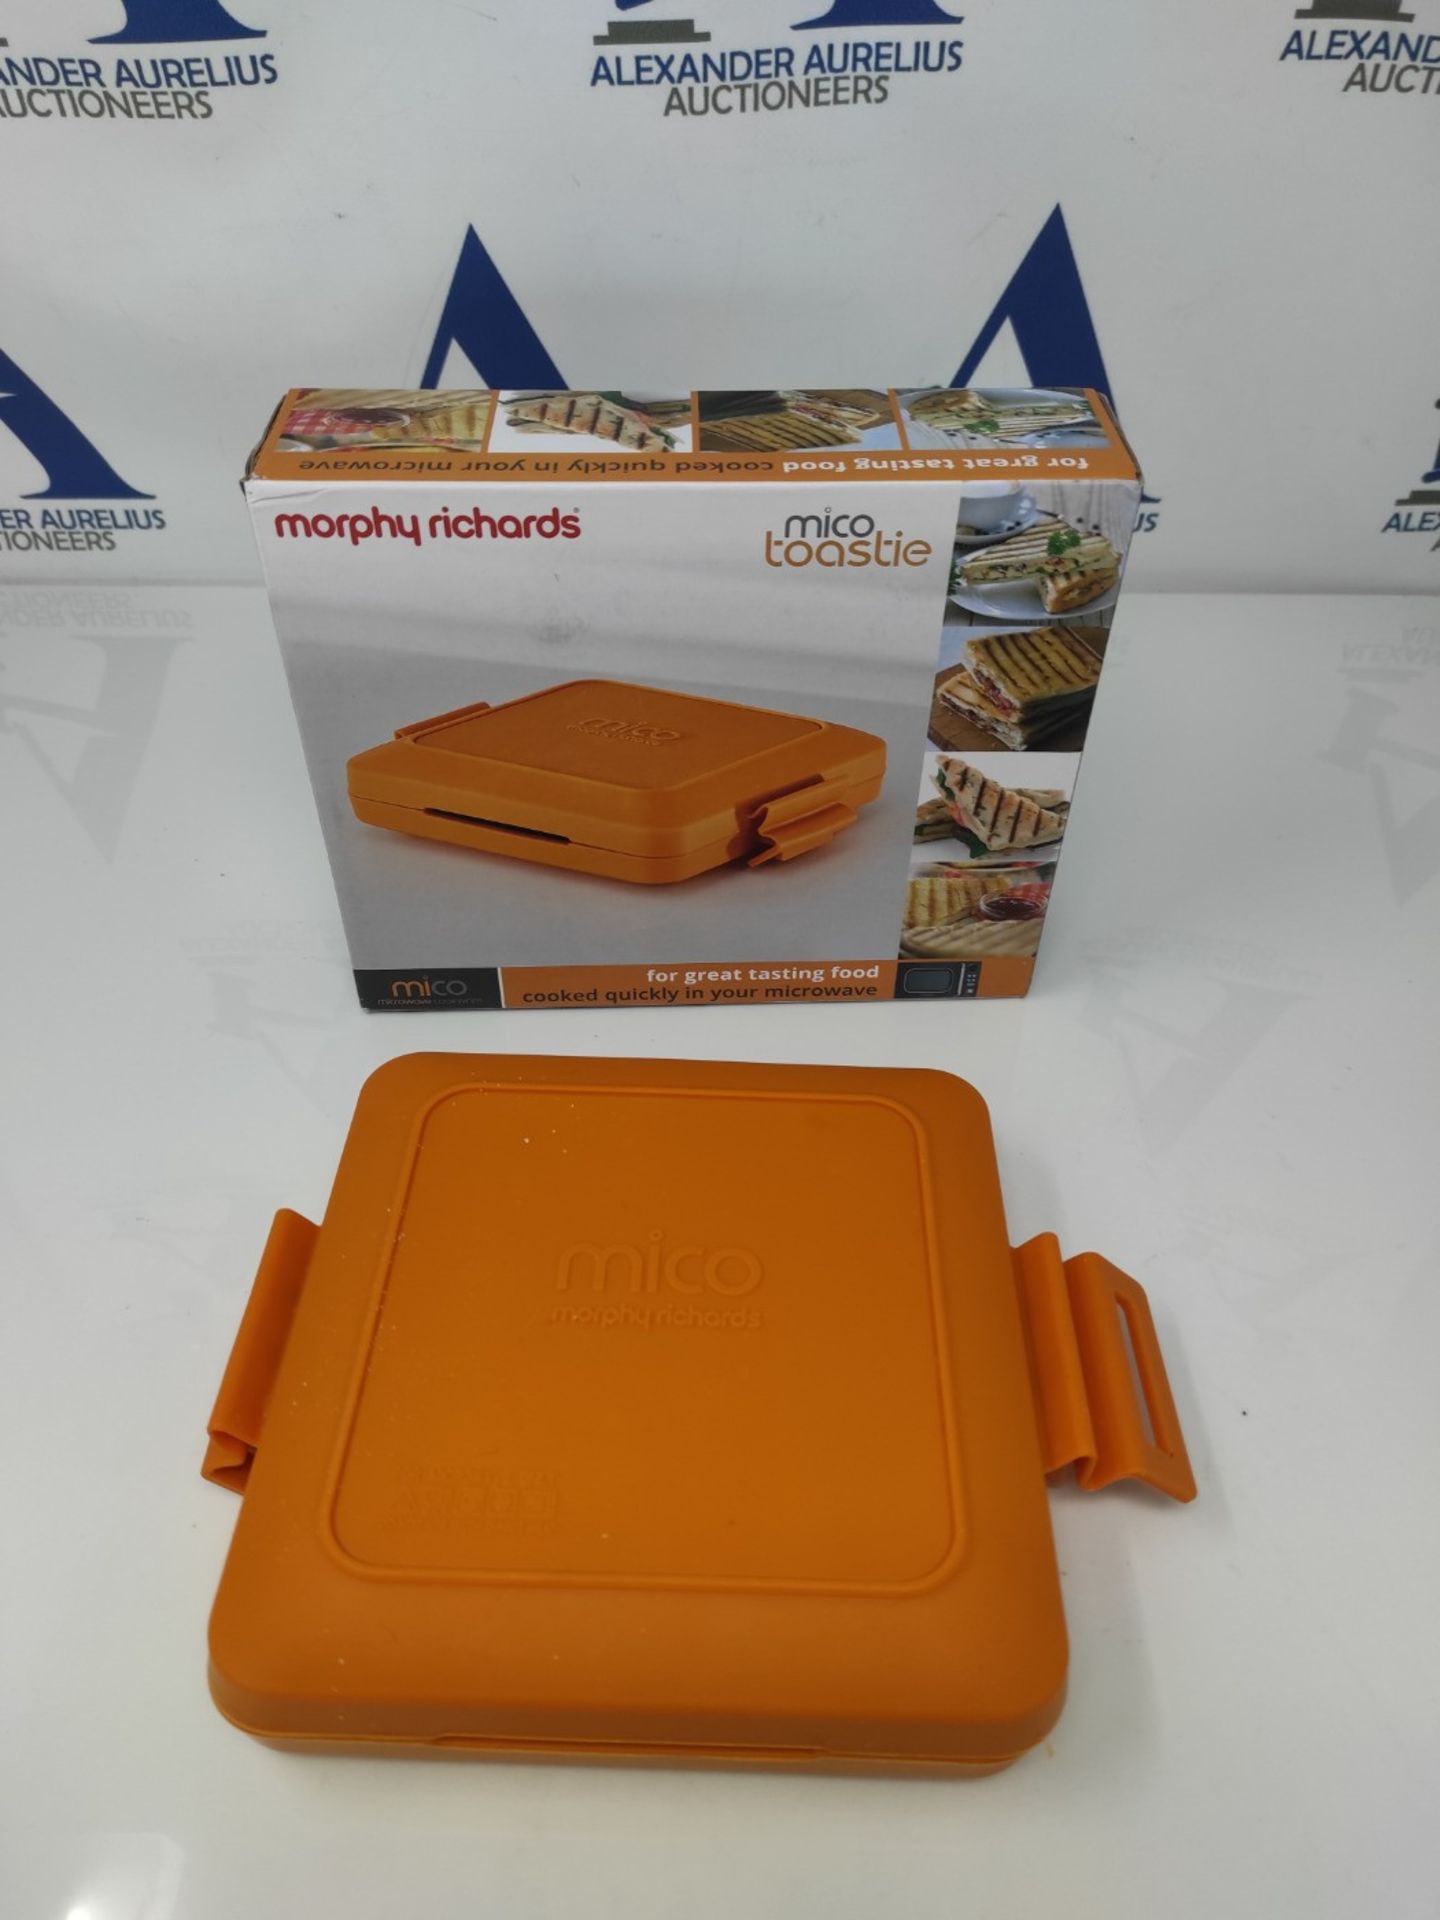 Morphy Richards Mico Microwave Toastie Sandwich Maker and Grill, Silicone Microwaveabl - Bild 2 aus 3